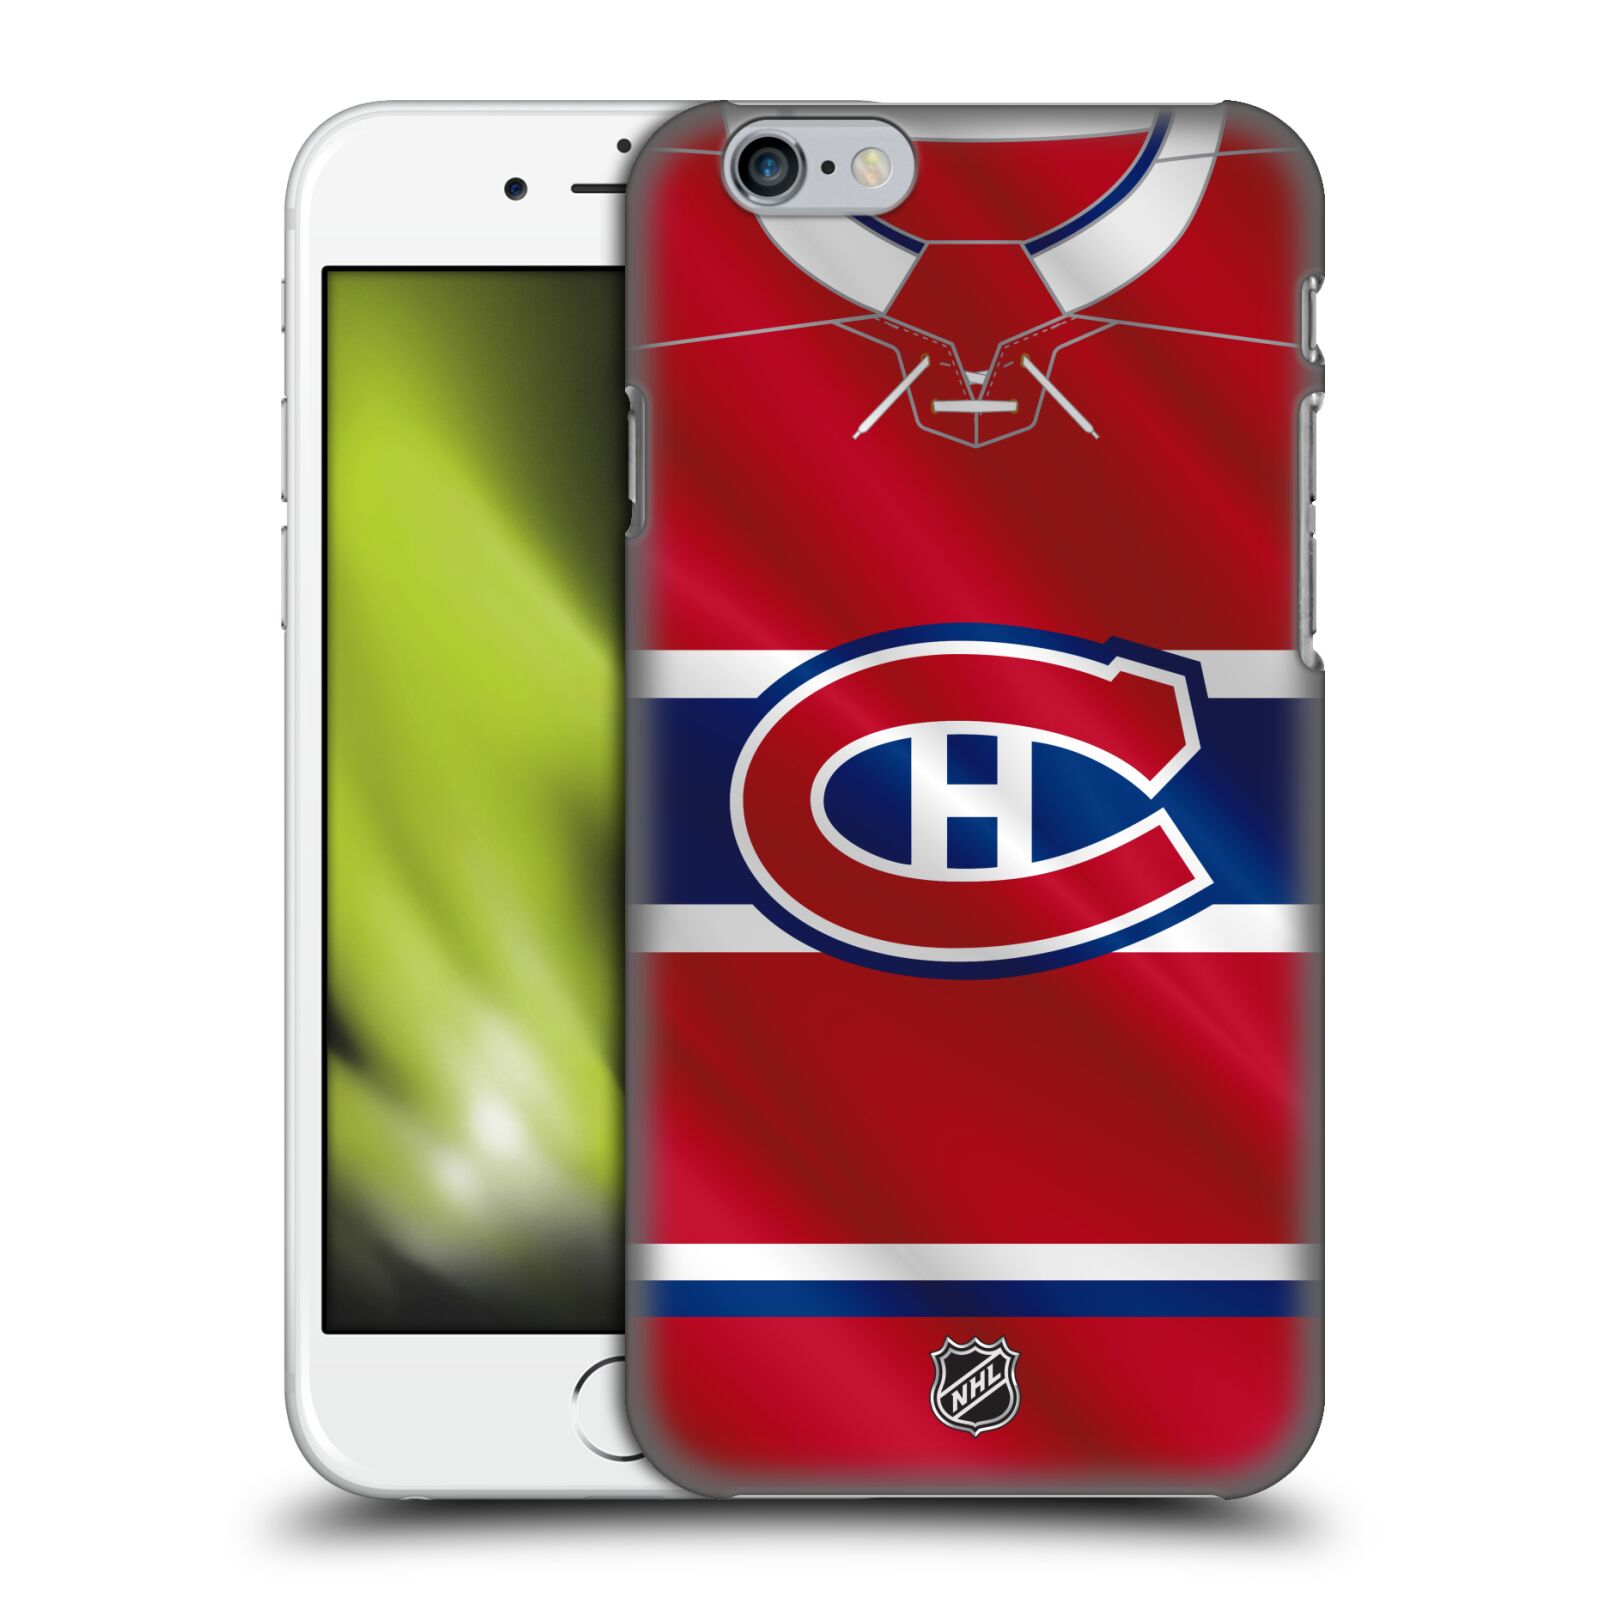 Pouzdro na mobil Apple Iphone 6/6S - HEAD CASE - Hokej NHL - Montreal Canadiens - Dres